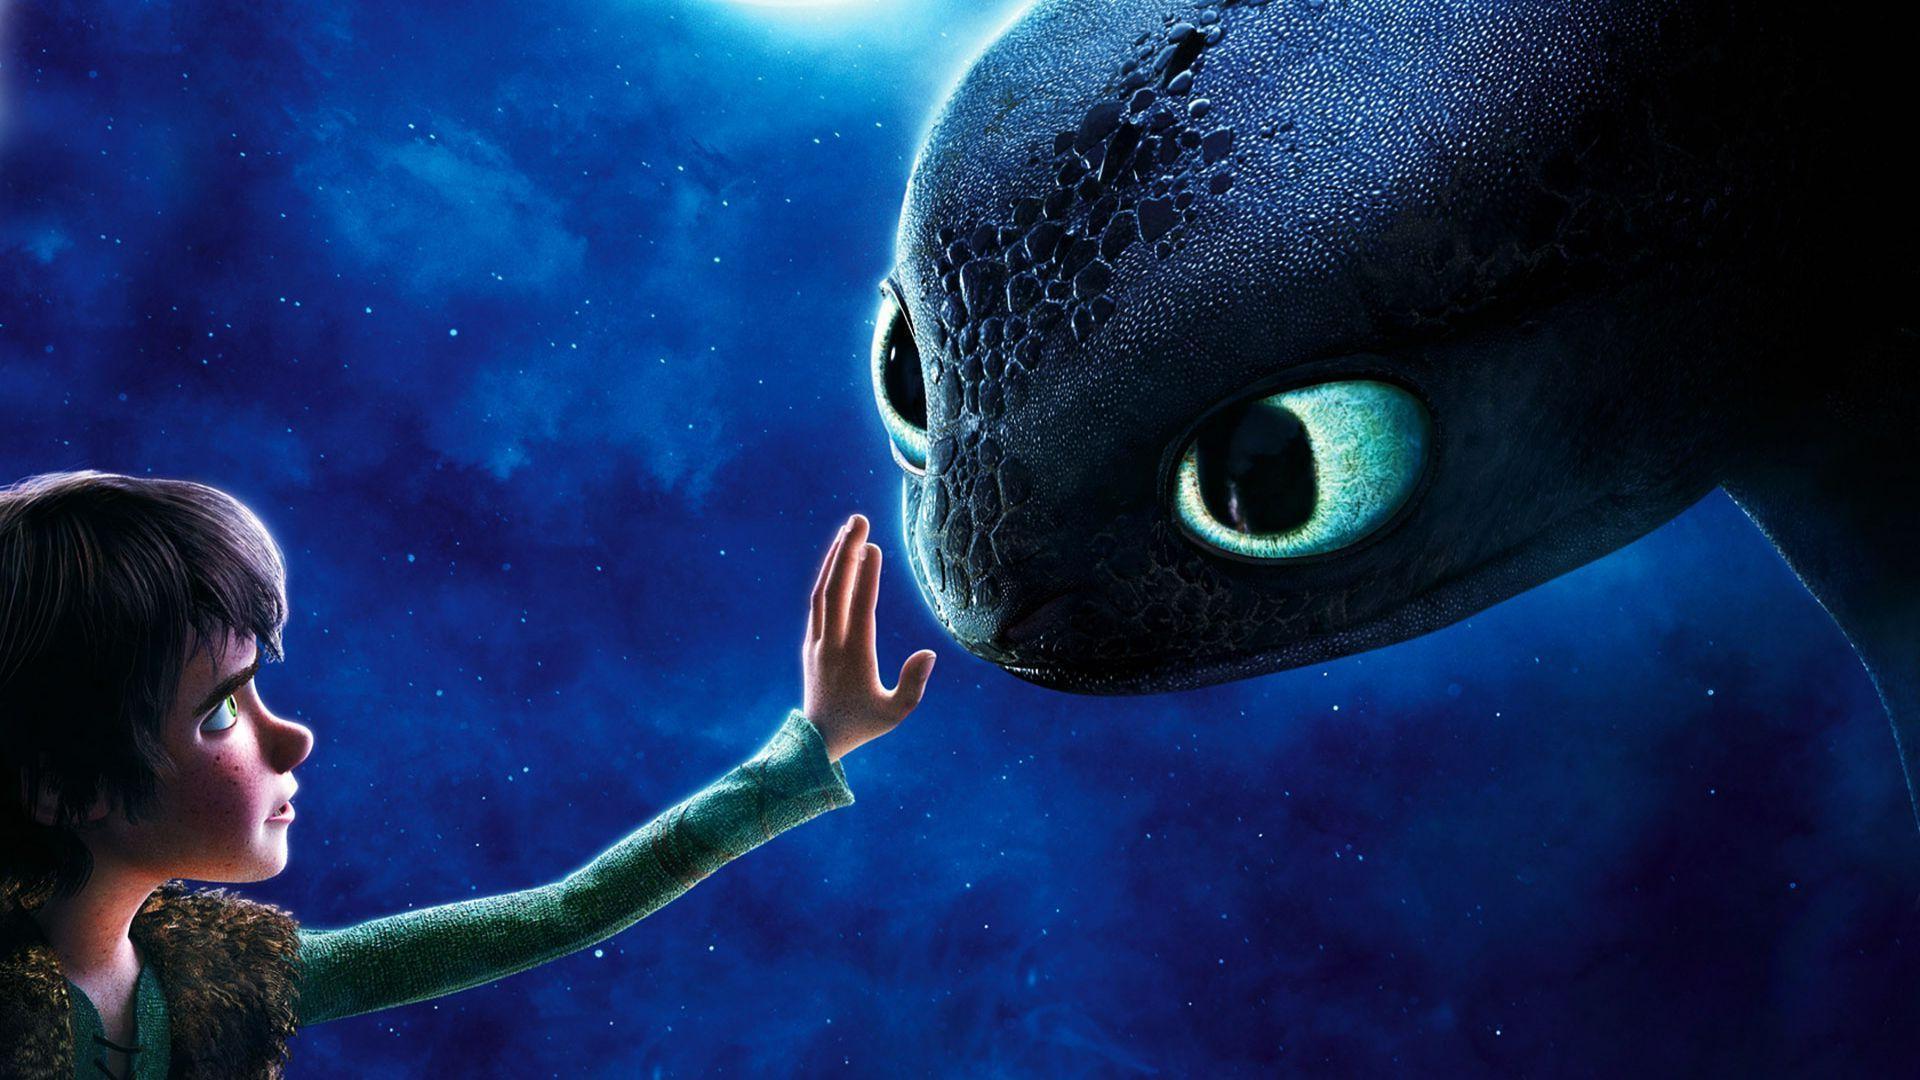 Toothless Wallpaper HD 75 images